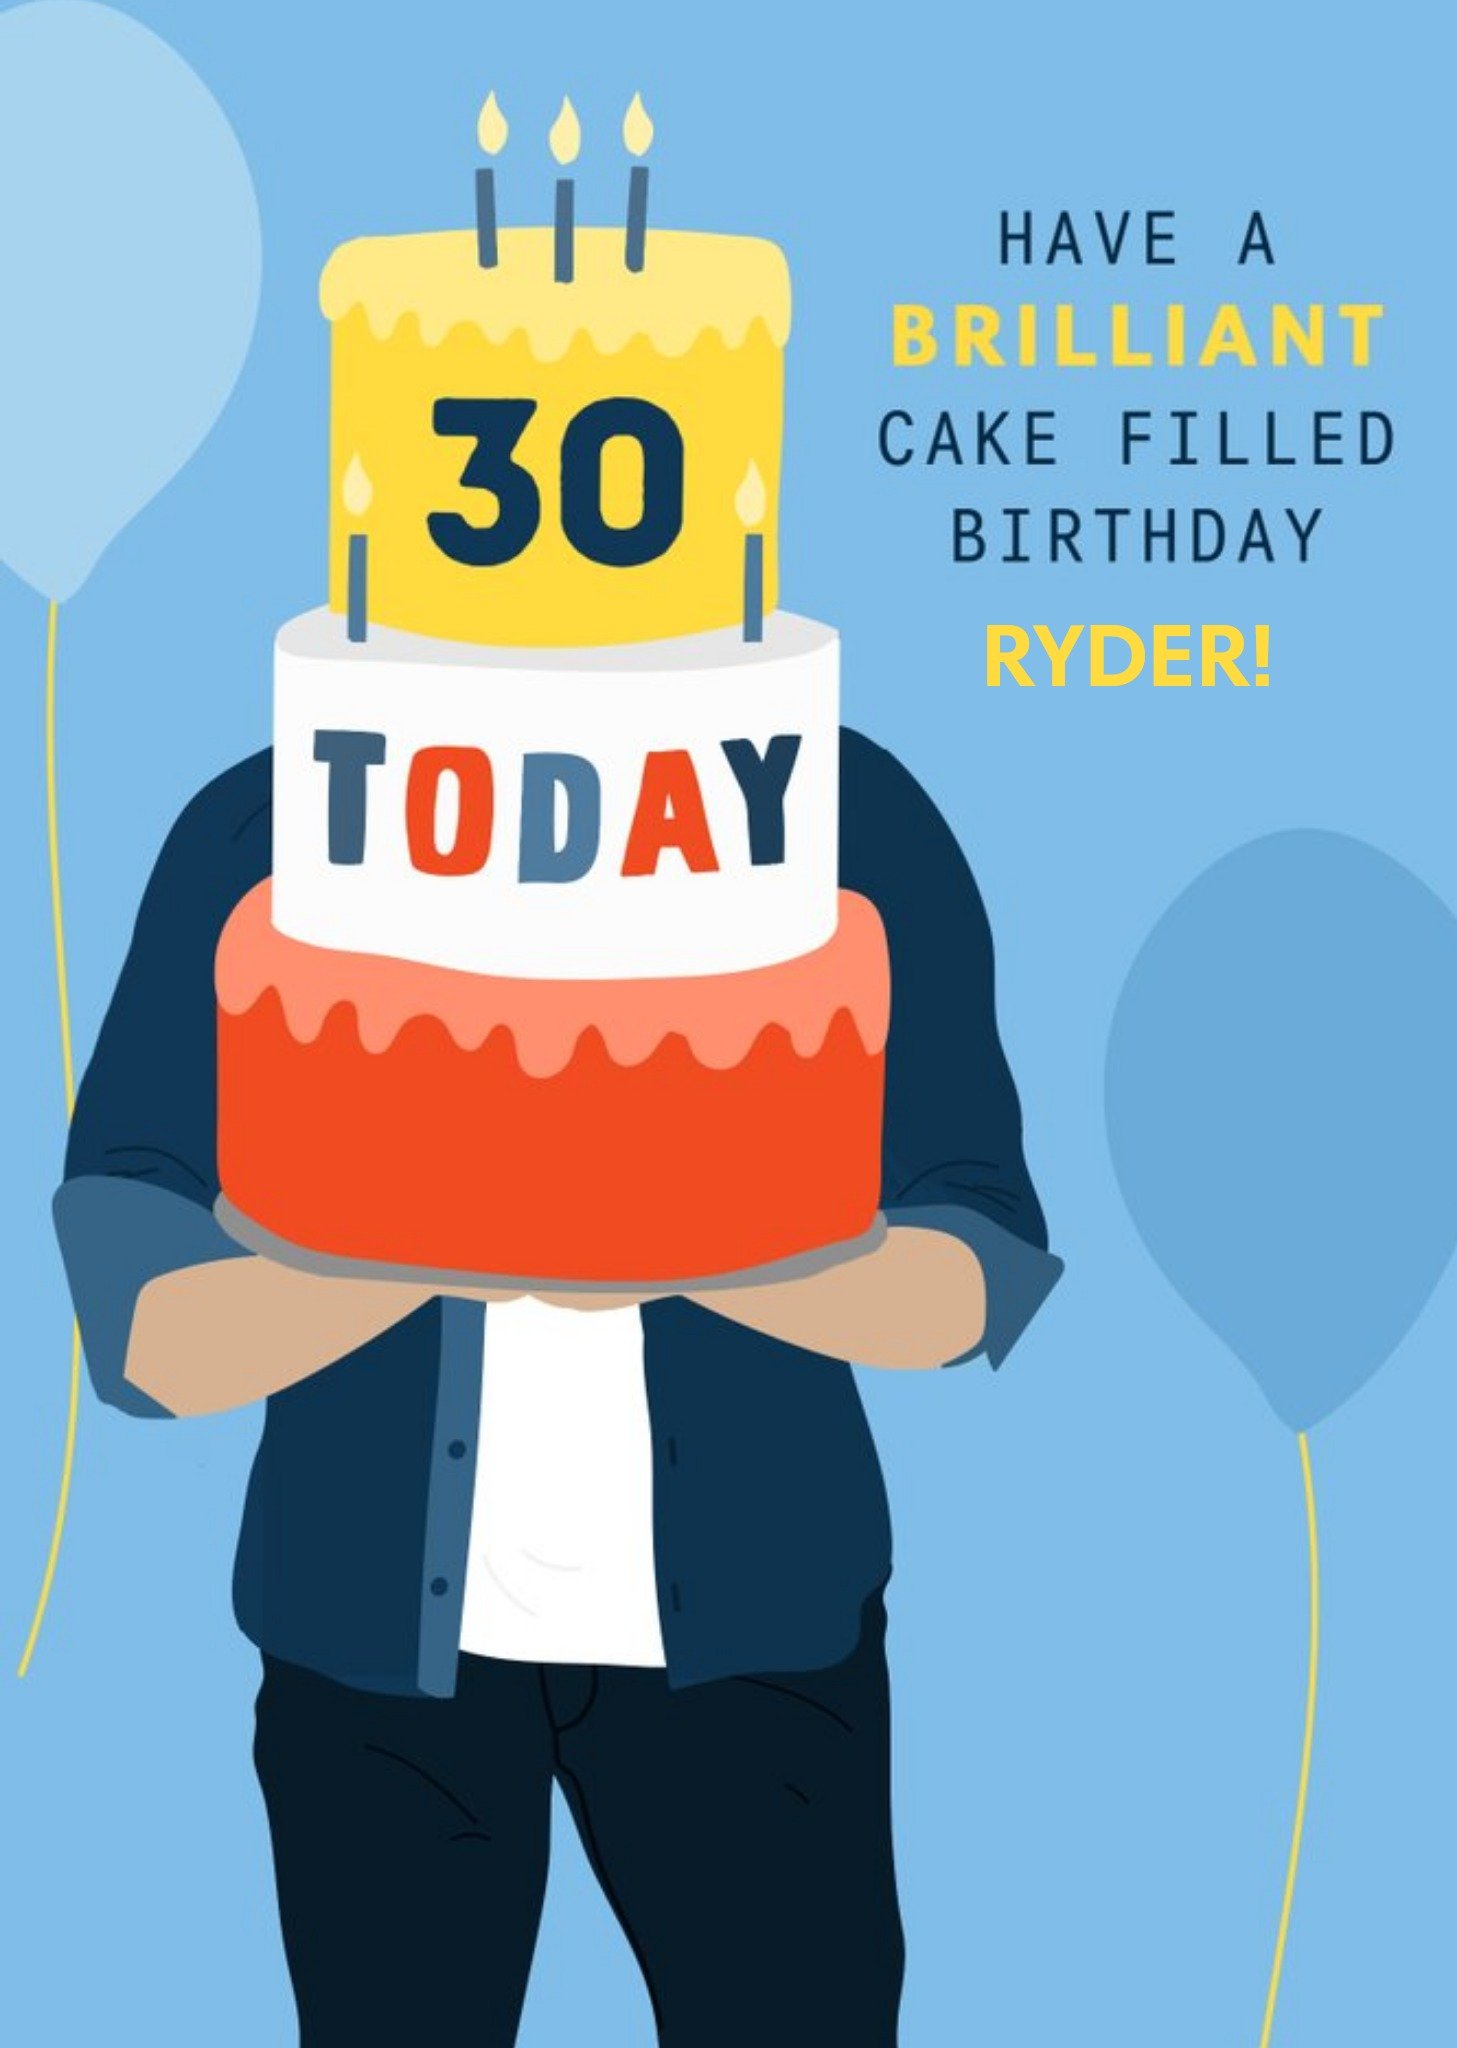 Moonpig Illustrated 30 Today Have A Brilliant Cake Filled Birthday Card Ecard